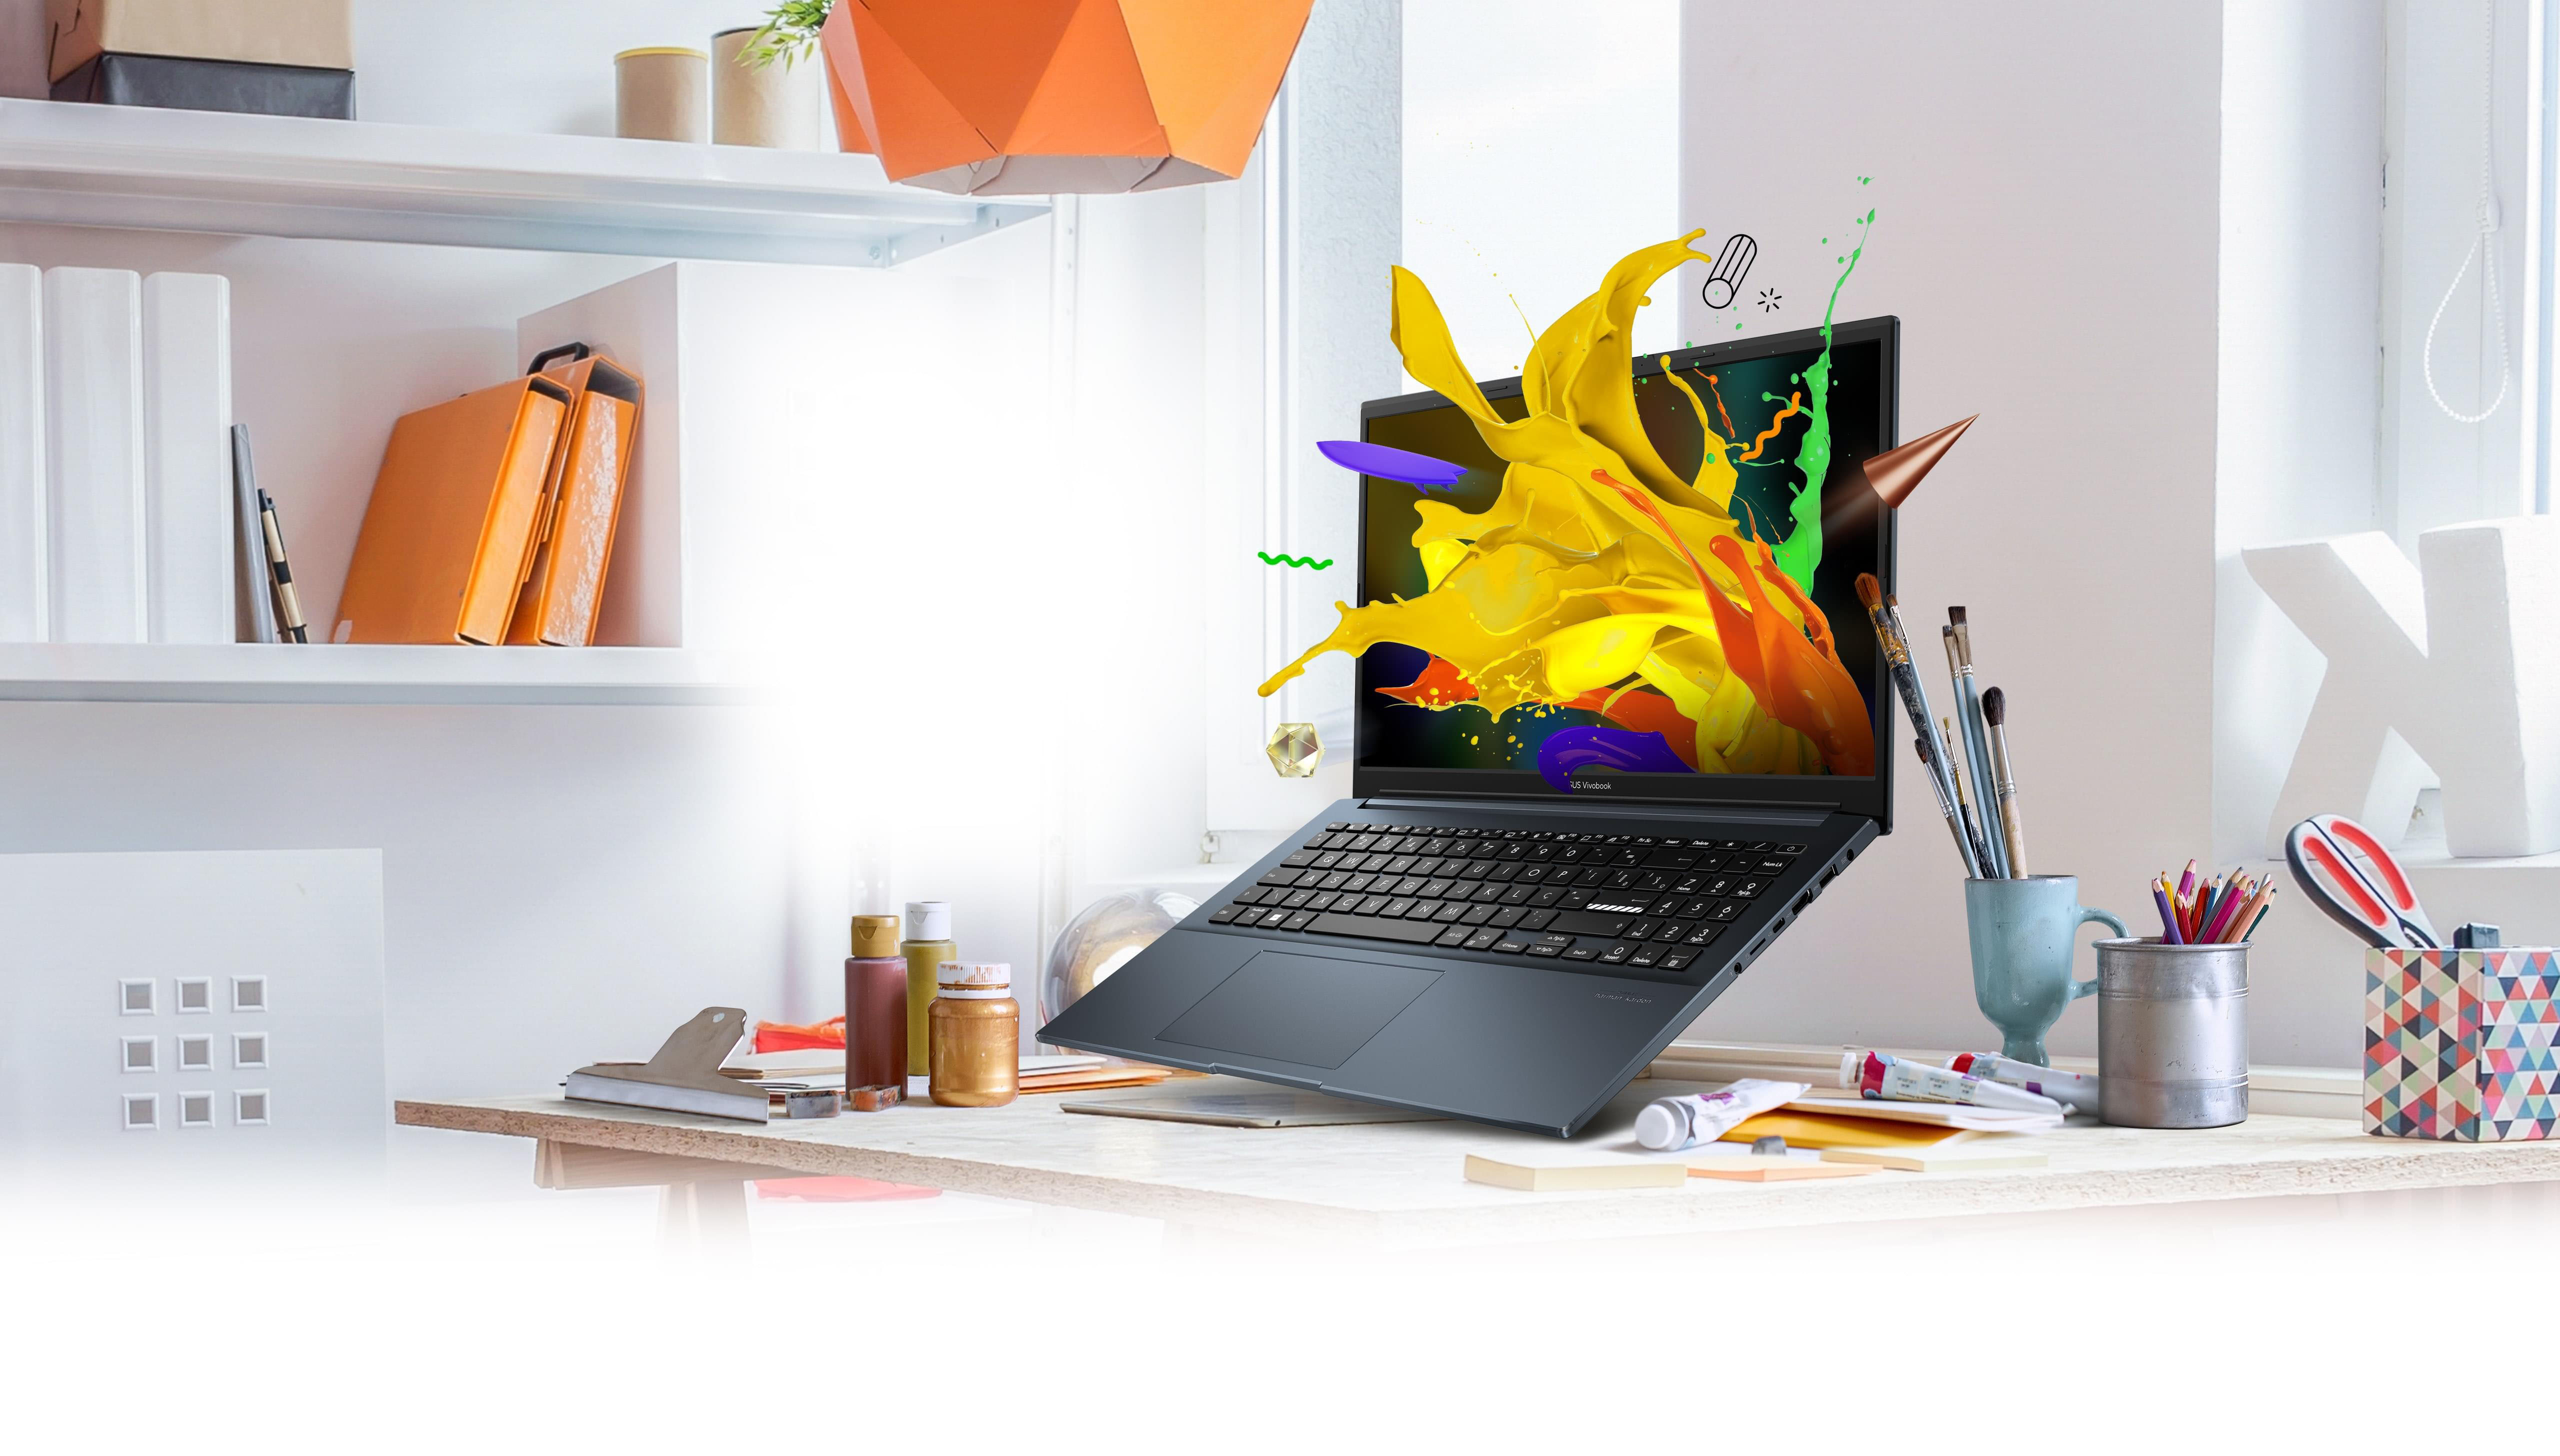 Vivobook Pro 15 OLED floating above a desk with artists’ materials and stationery. A colorful splash graphic is popping out of the screen.